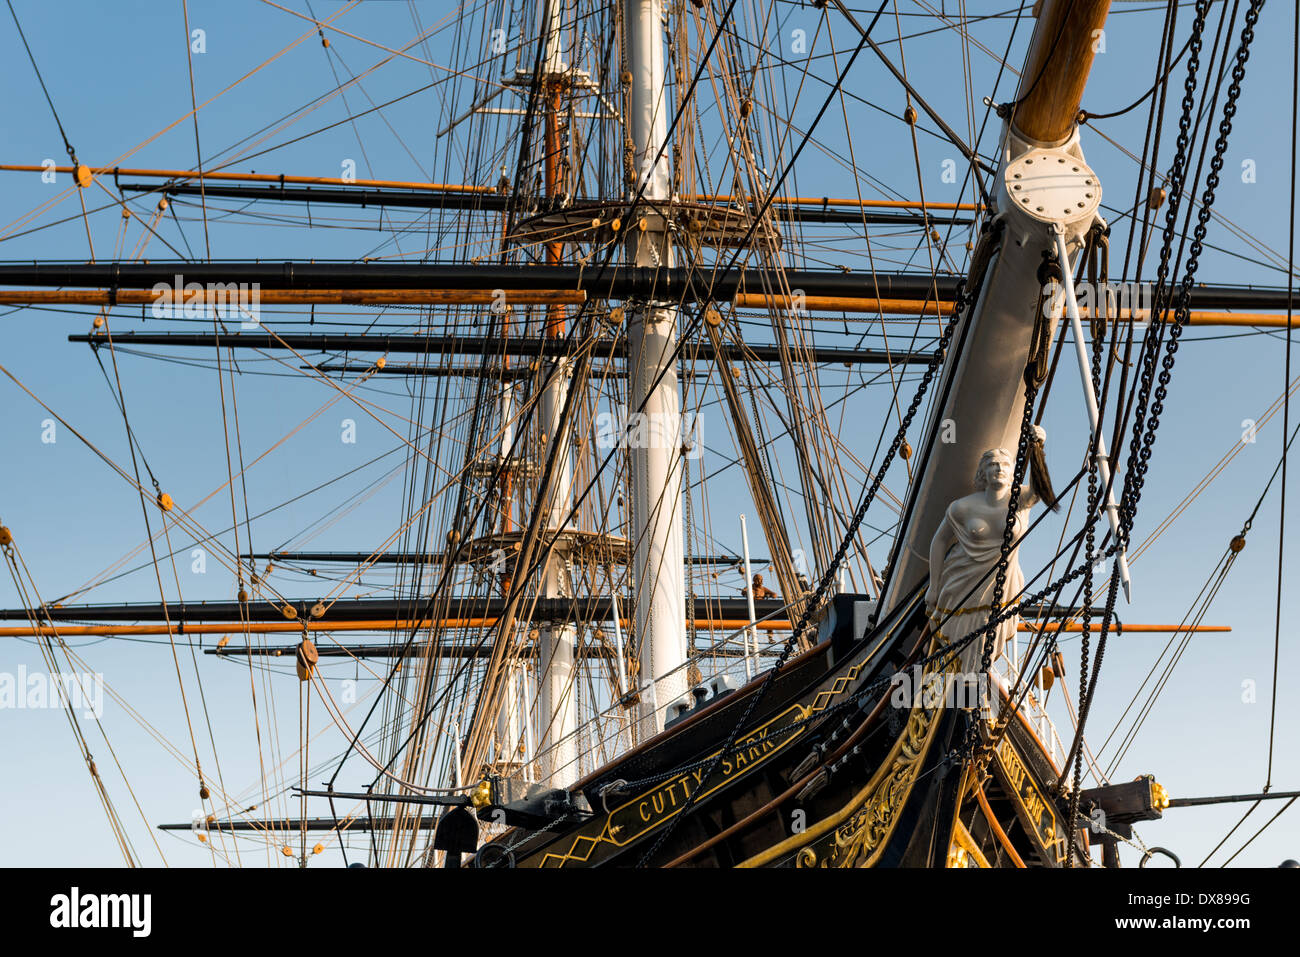 Cutty Sark, the last surviving British tea clipper, now a visitor museum in Greenwich, London Stock Photo